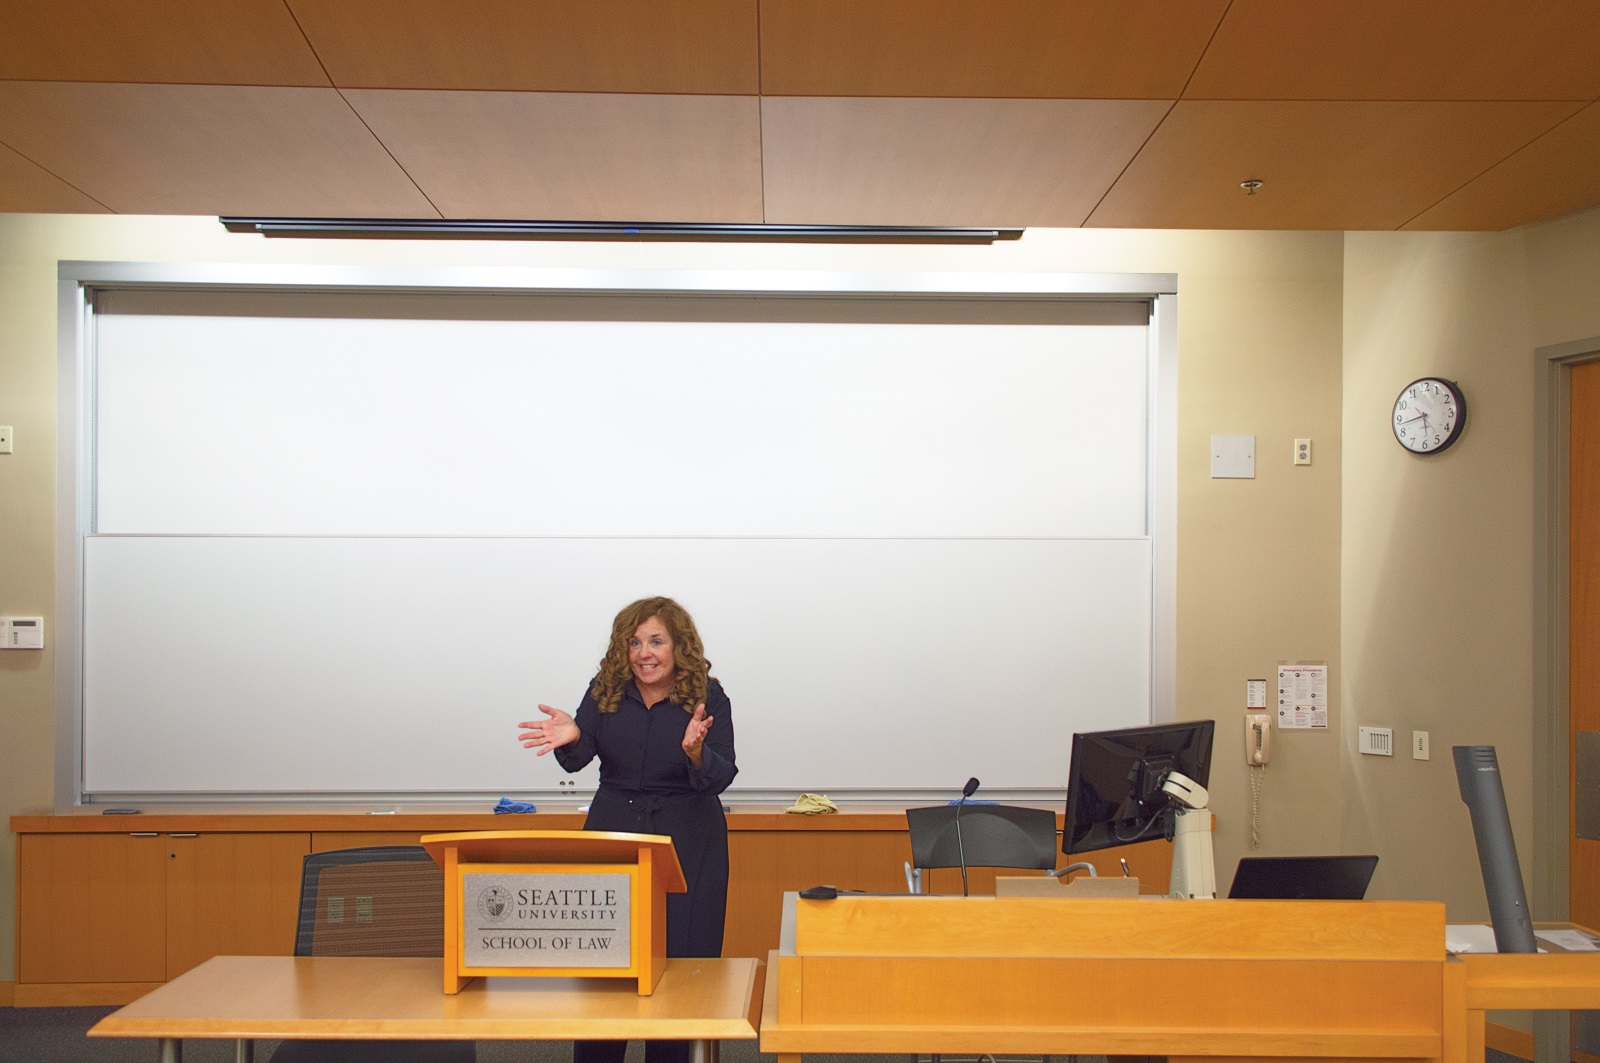 Woman in black blouse standing at a lectern in front of a classroom whiteboard